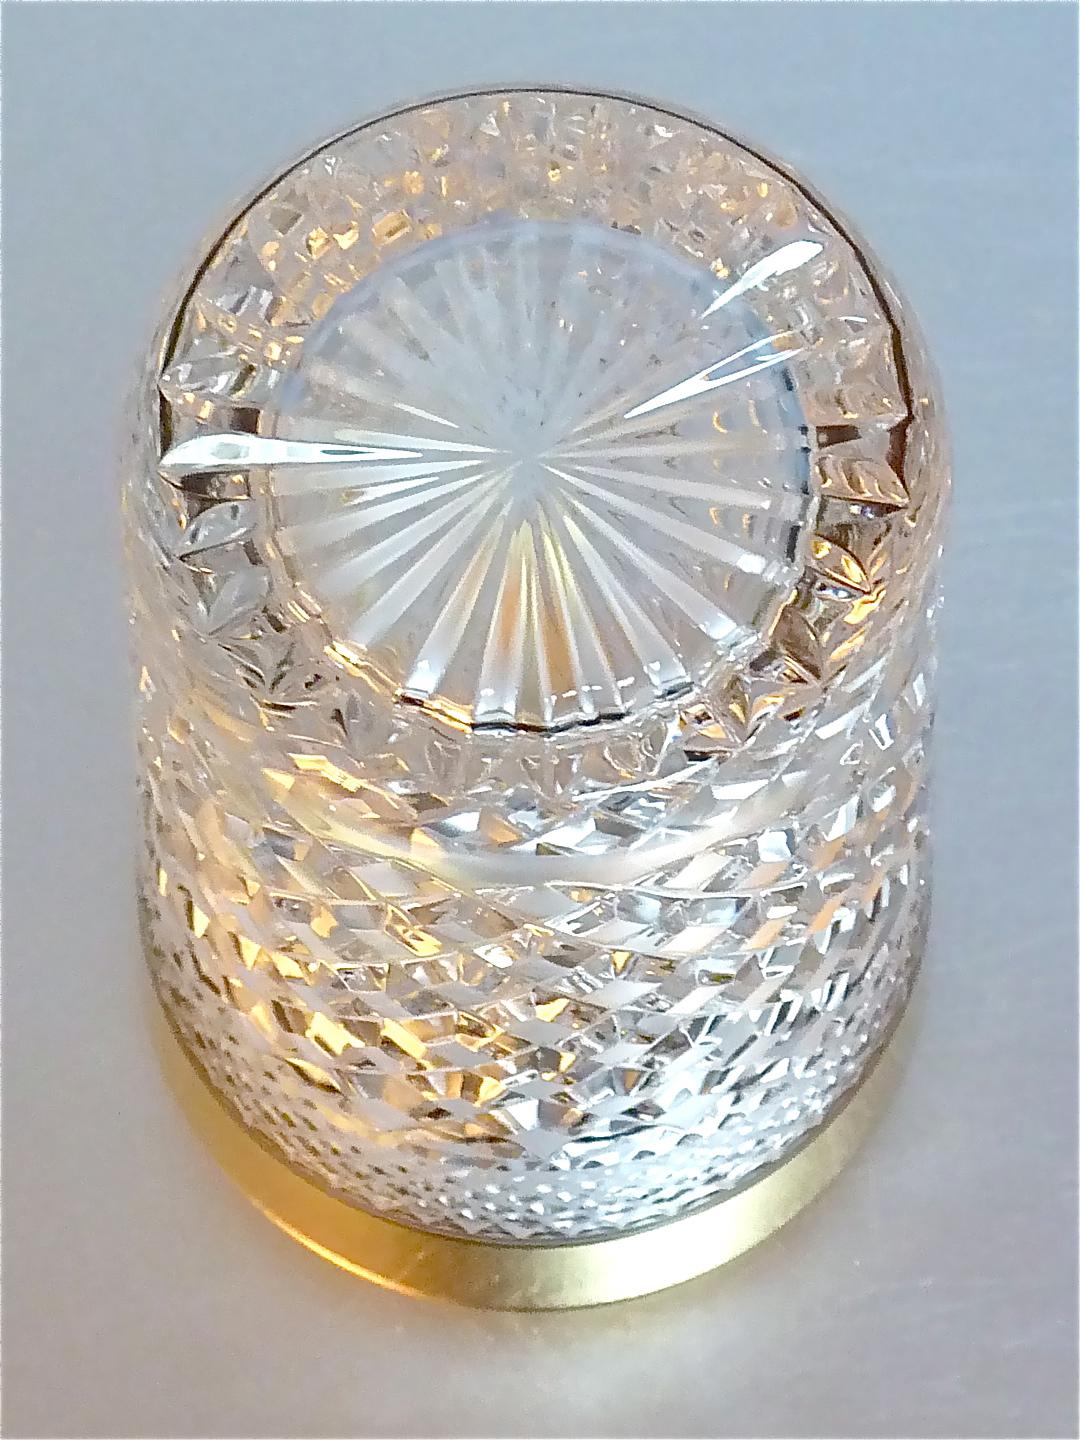 Precious 6 Water Glasses Gold Crystal Glass Tumbler Josephinenhuette Moser For Sale 3